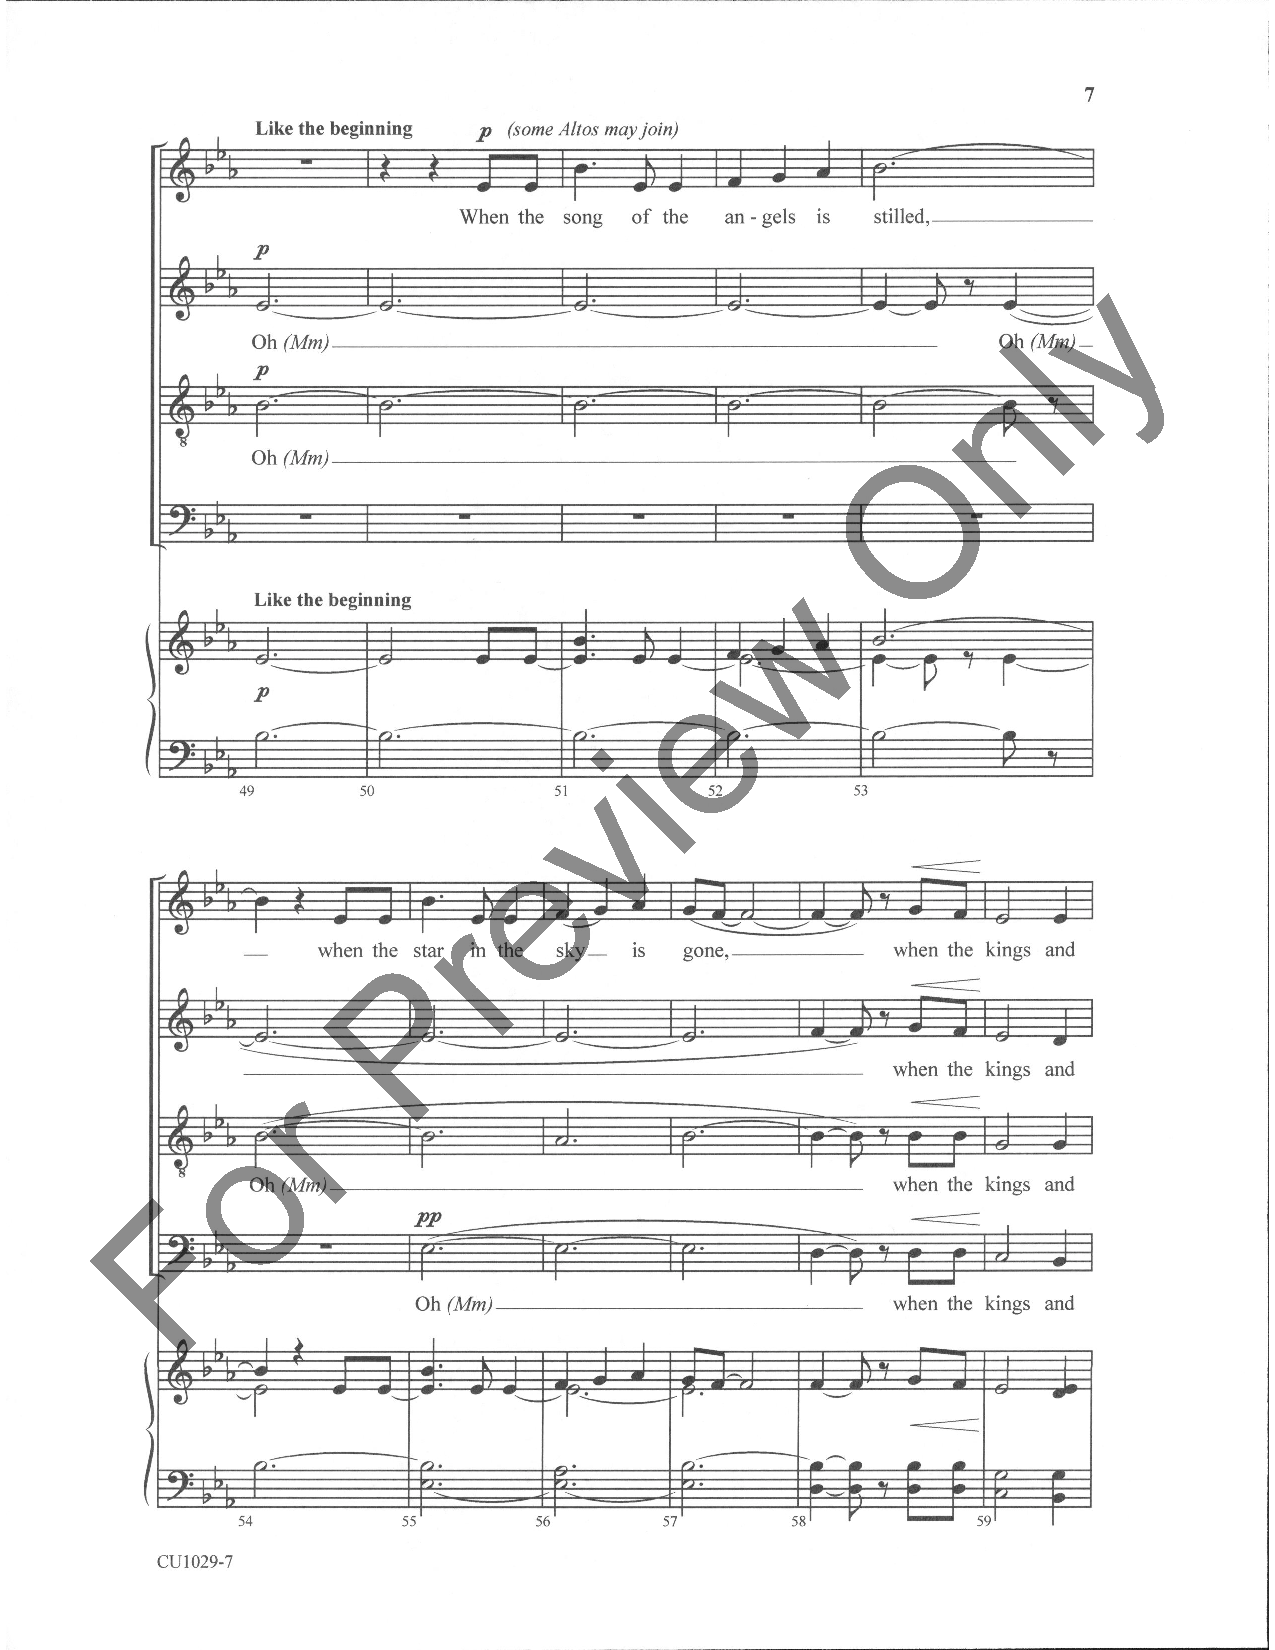 The Work of Christmas (SATB ) by Dan Forrest| J.W. Pepper Sheet Music